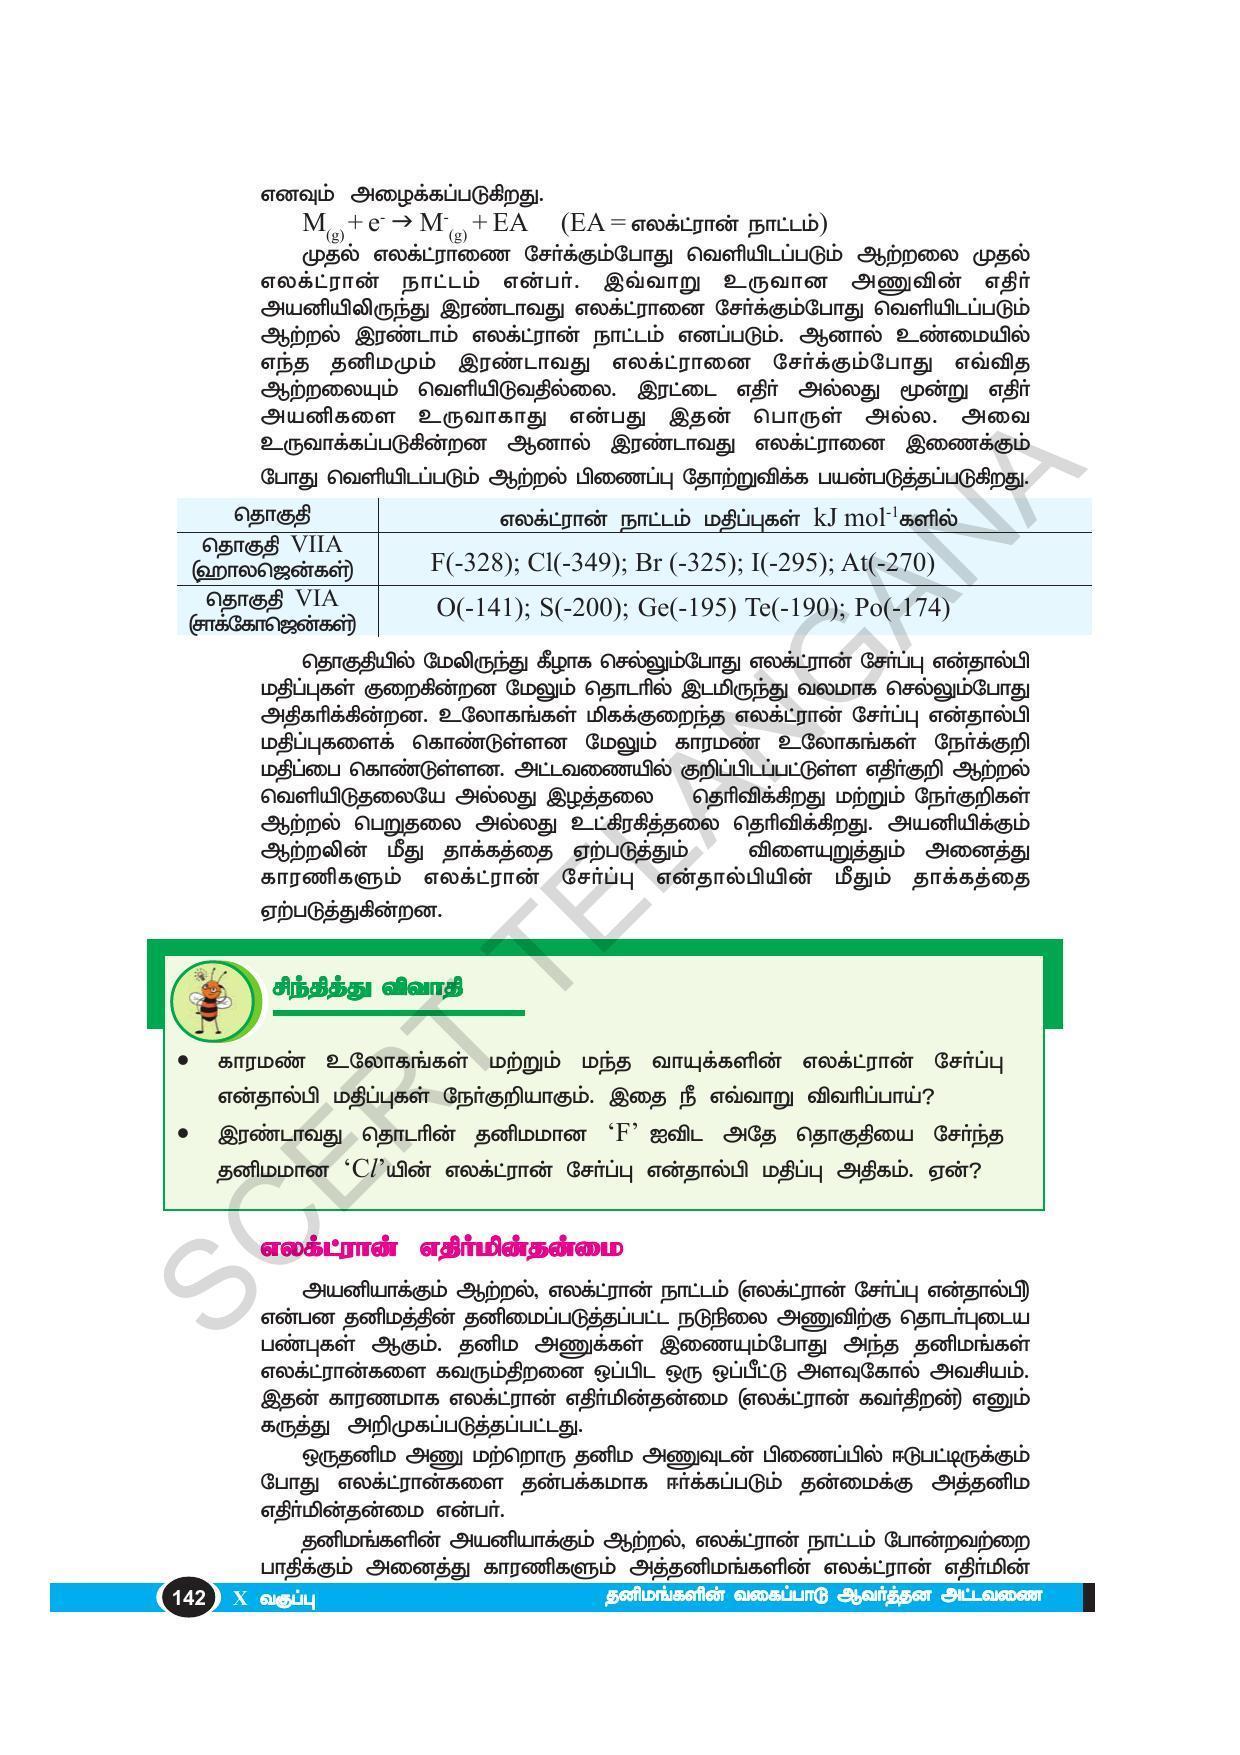 TS SCERT Class 10 Physical Science(Tamil Medium) Text Book - Page 154